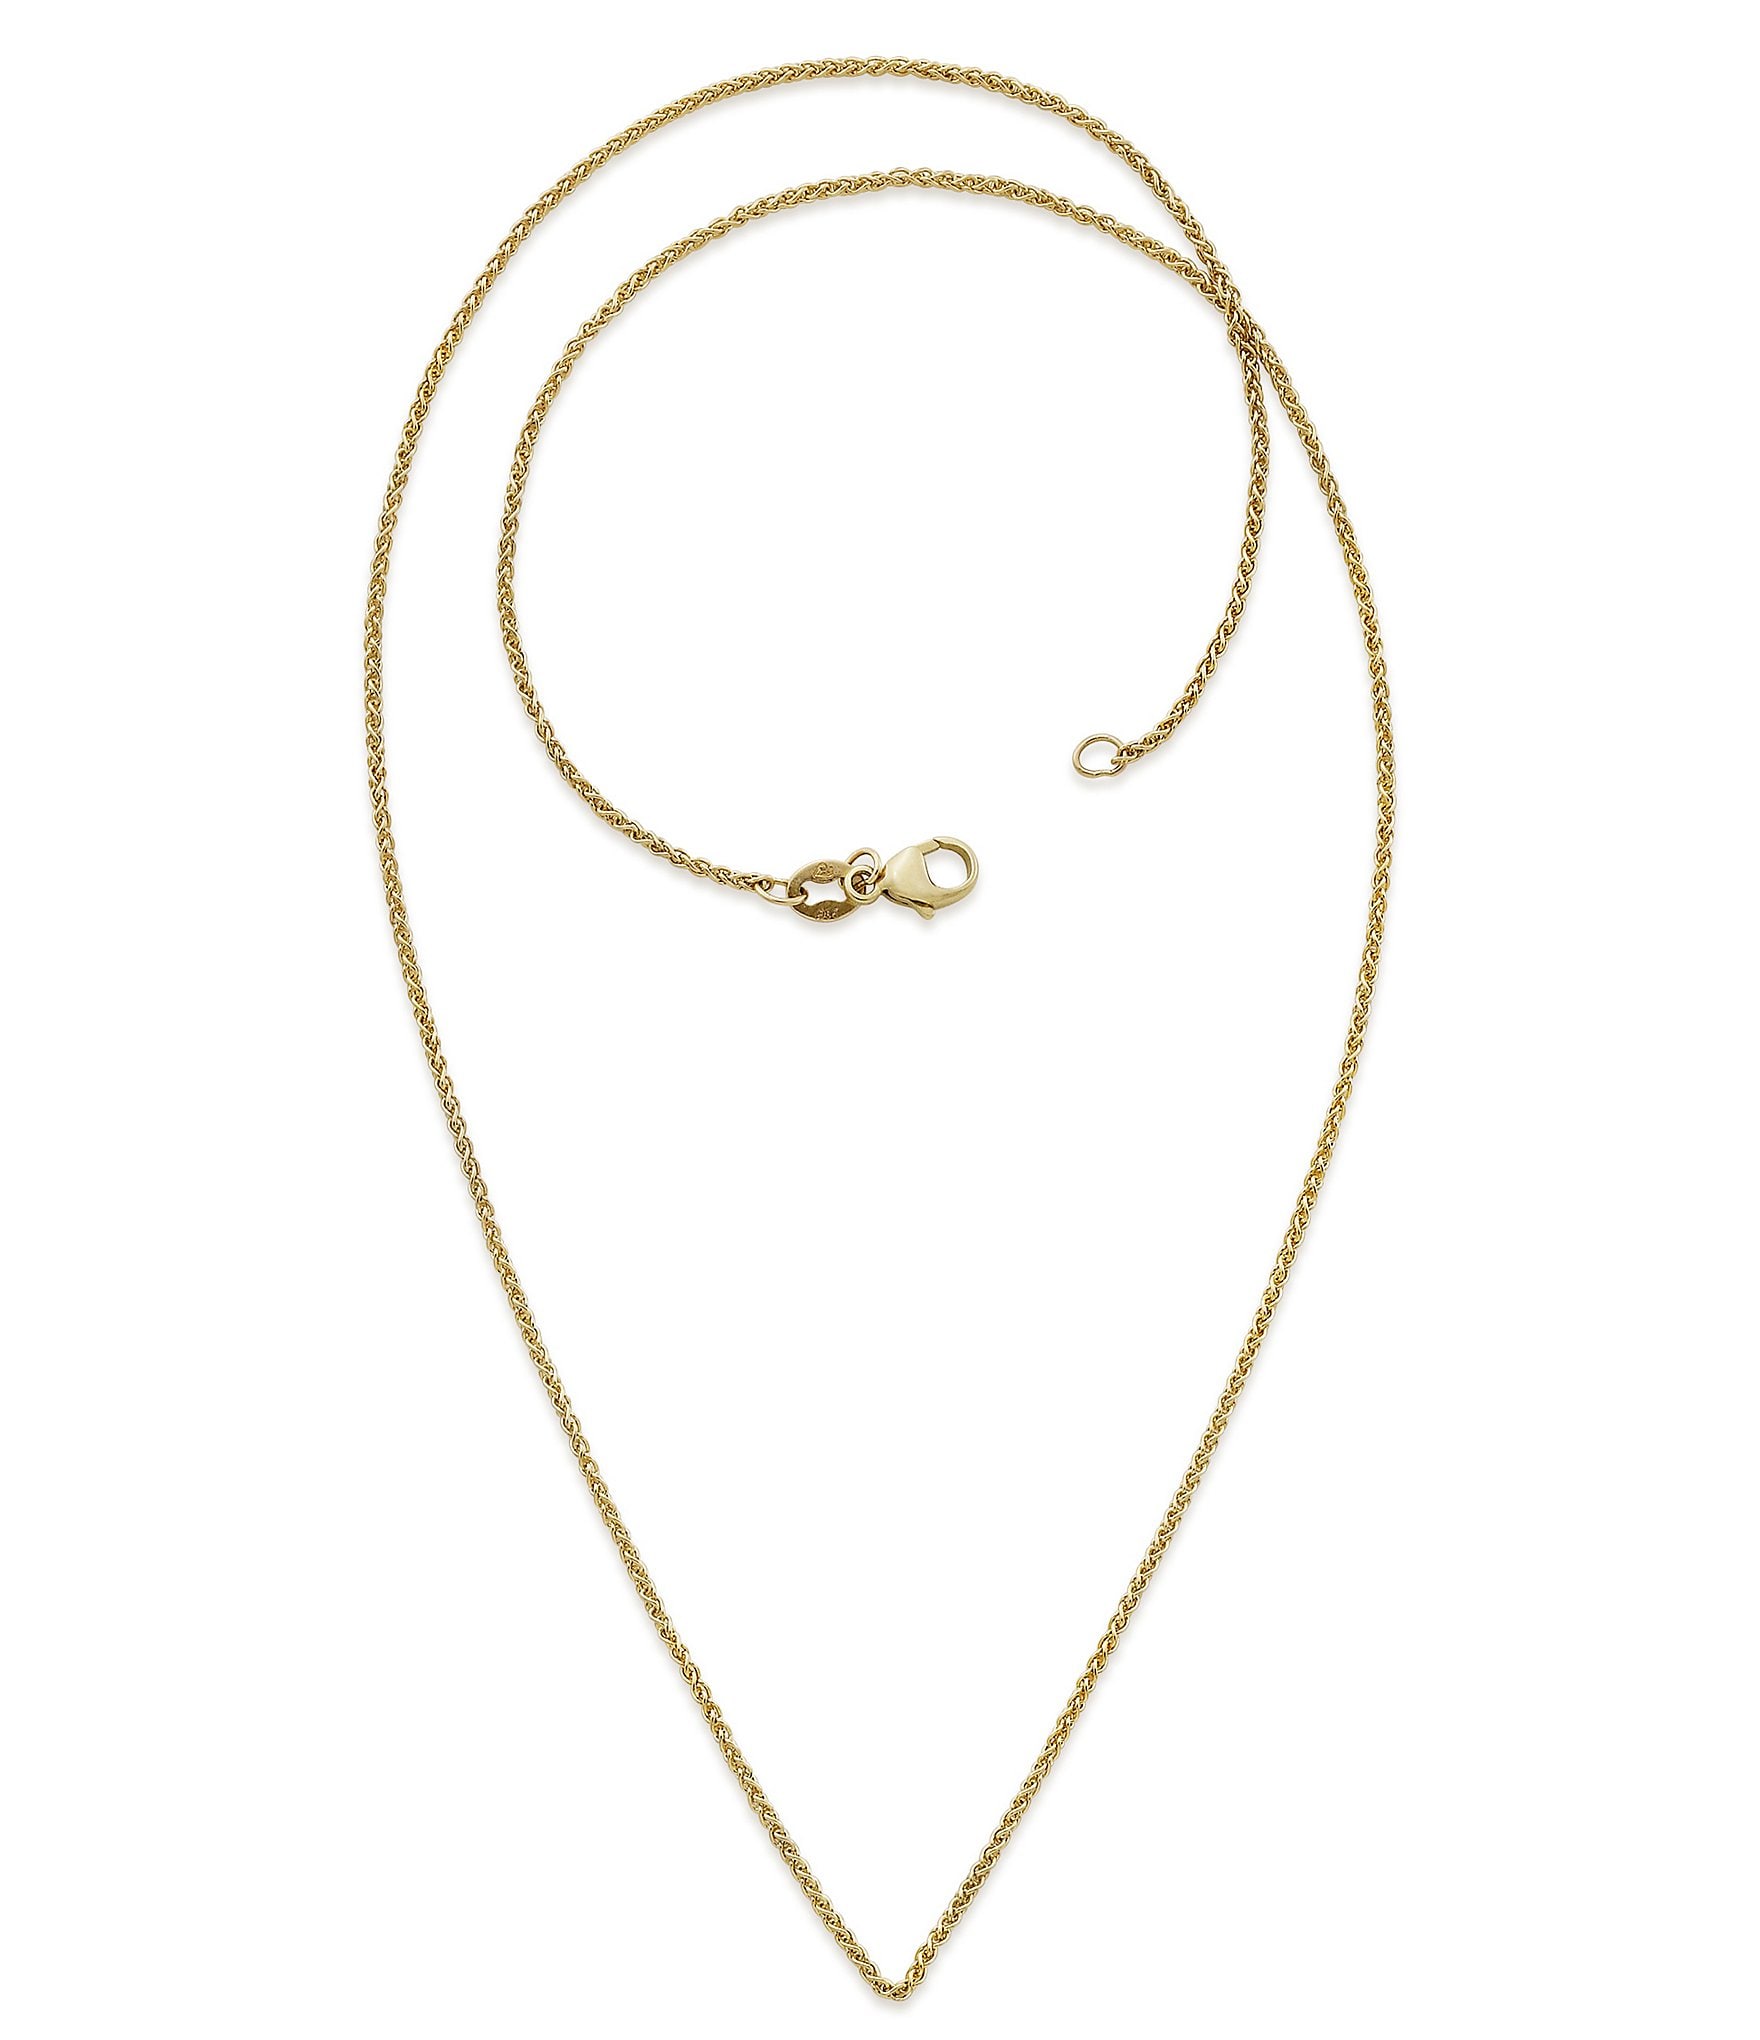 James Avery Forged 14K Gold Beaded Chain - 16 in.